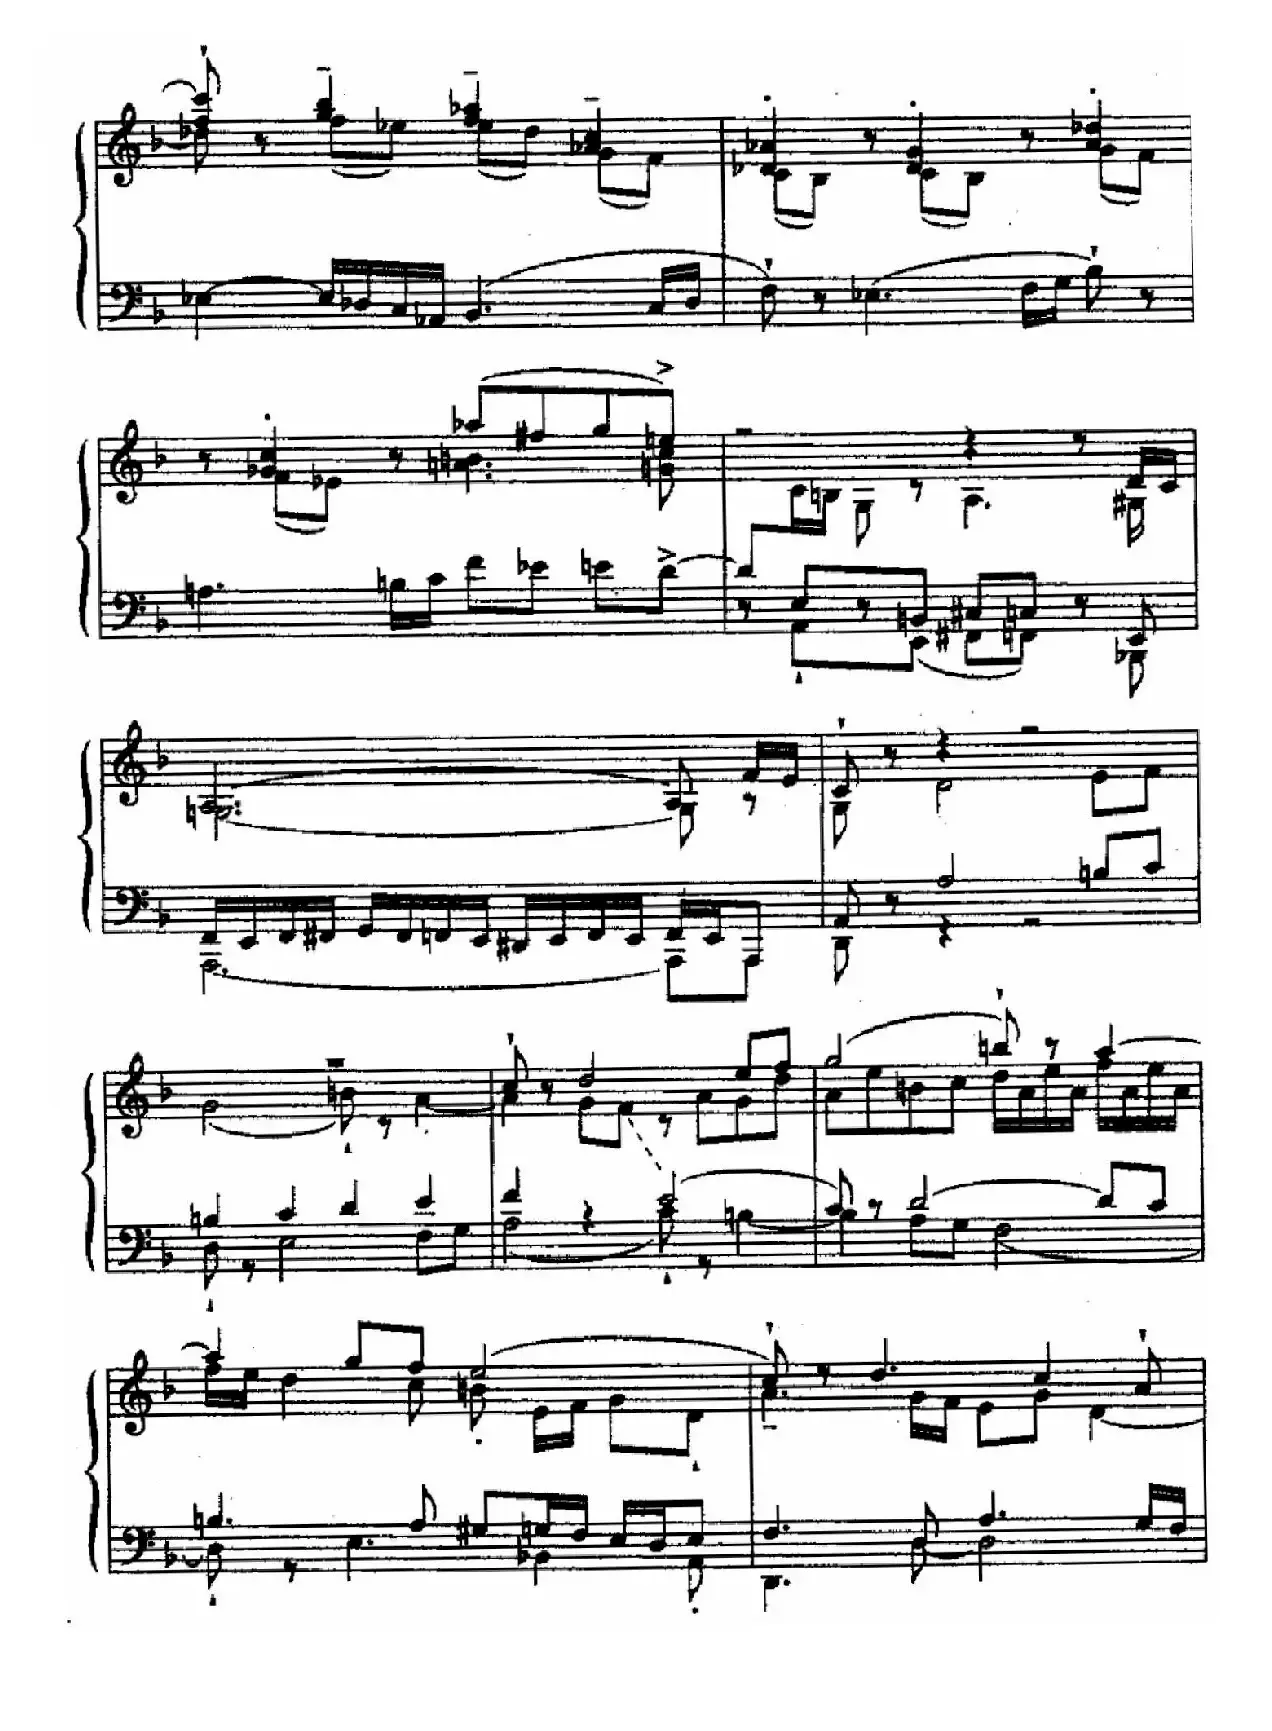 24 Preludes and Fugues Op.82（24首前奏曲与赋格·14）